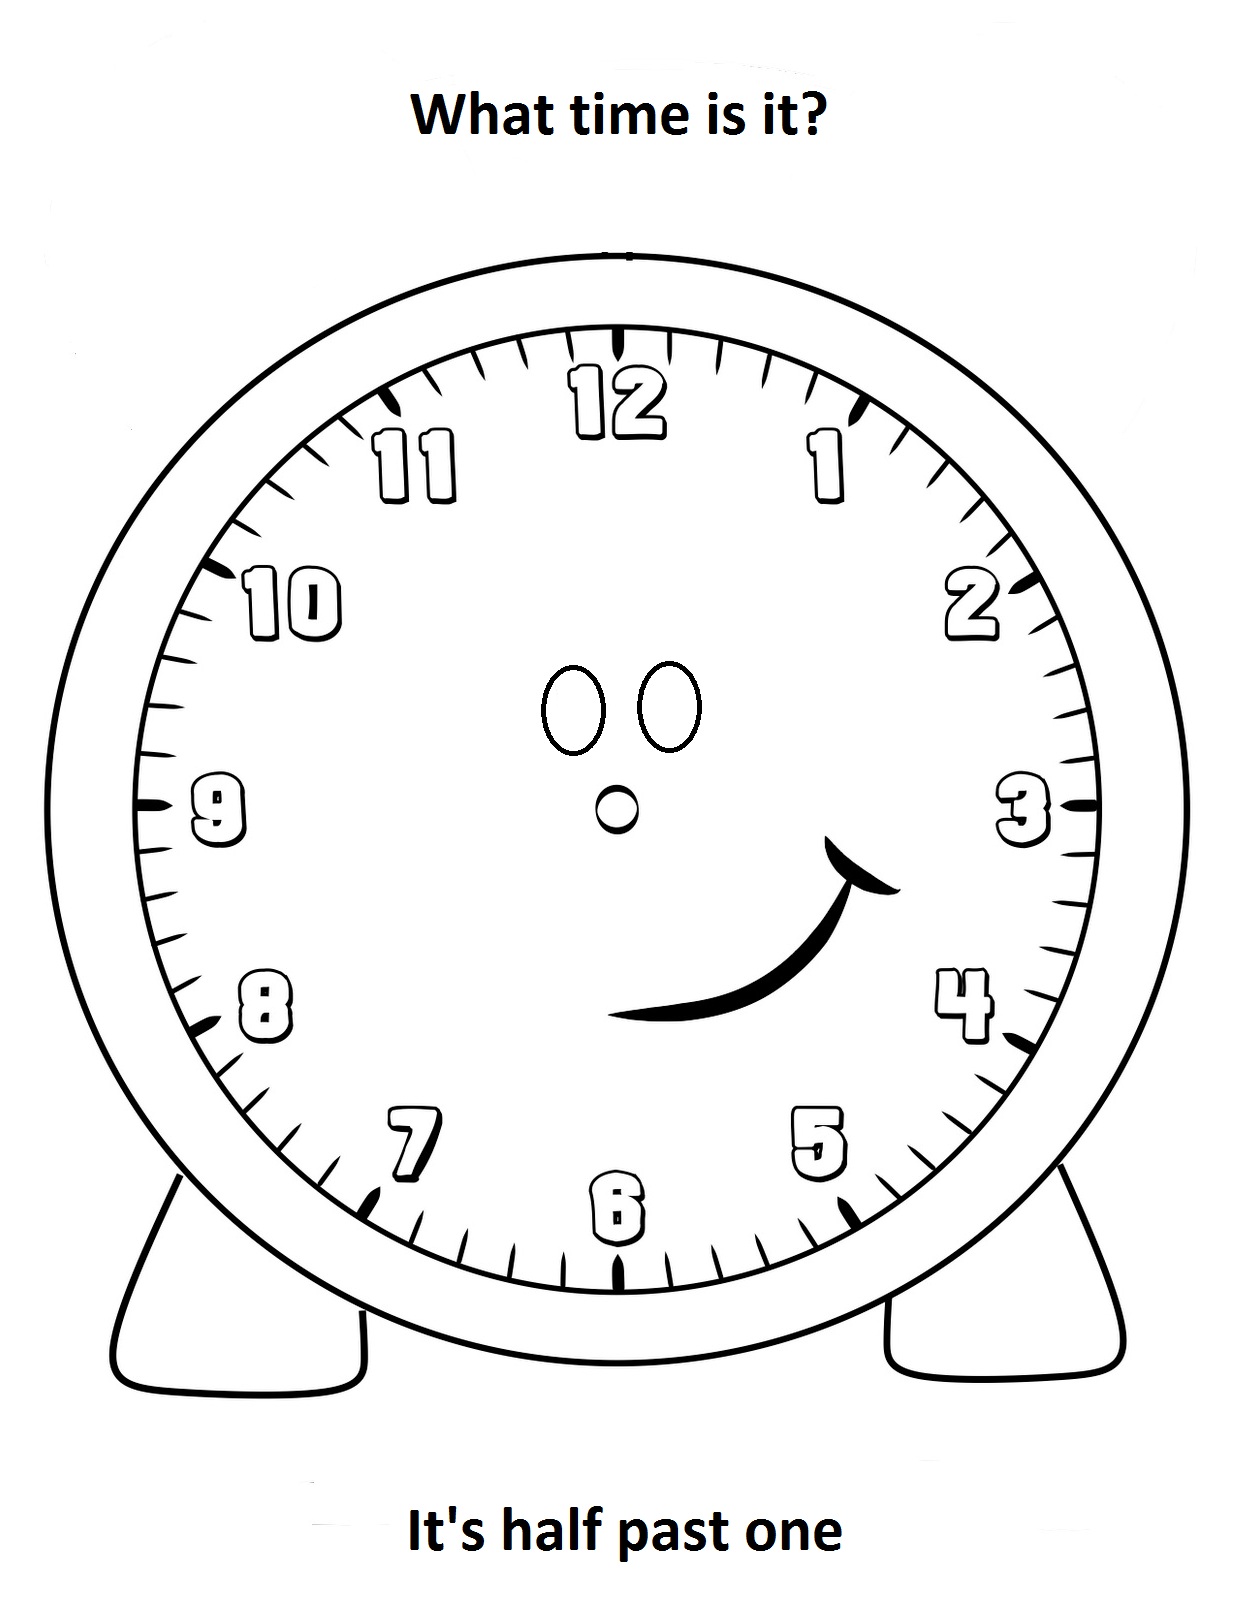 Half Past One Coloring Page